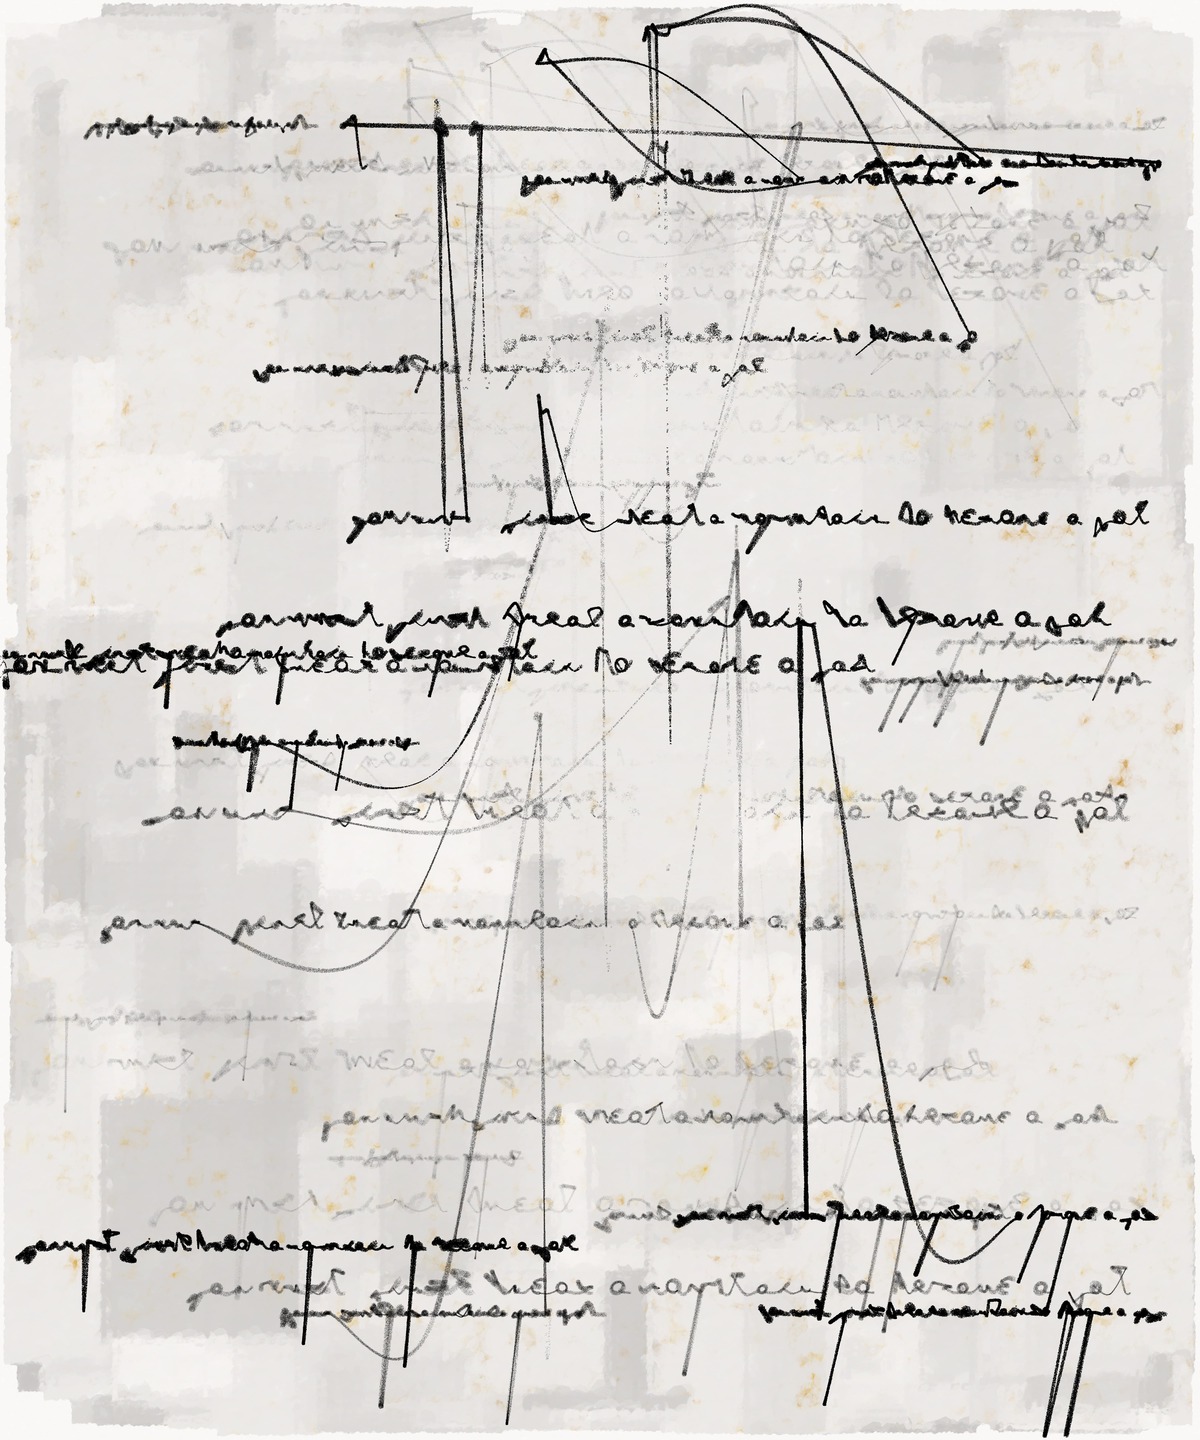 A digital image of a faded piece of paper with pale gray square patches, overlaid with lines of inky black asemic text